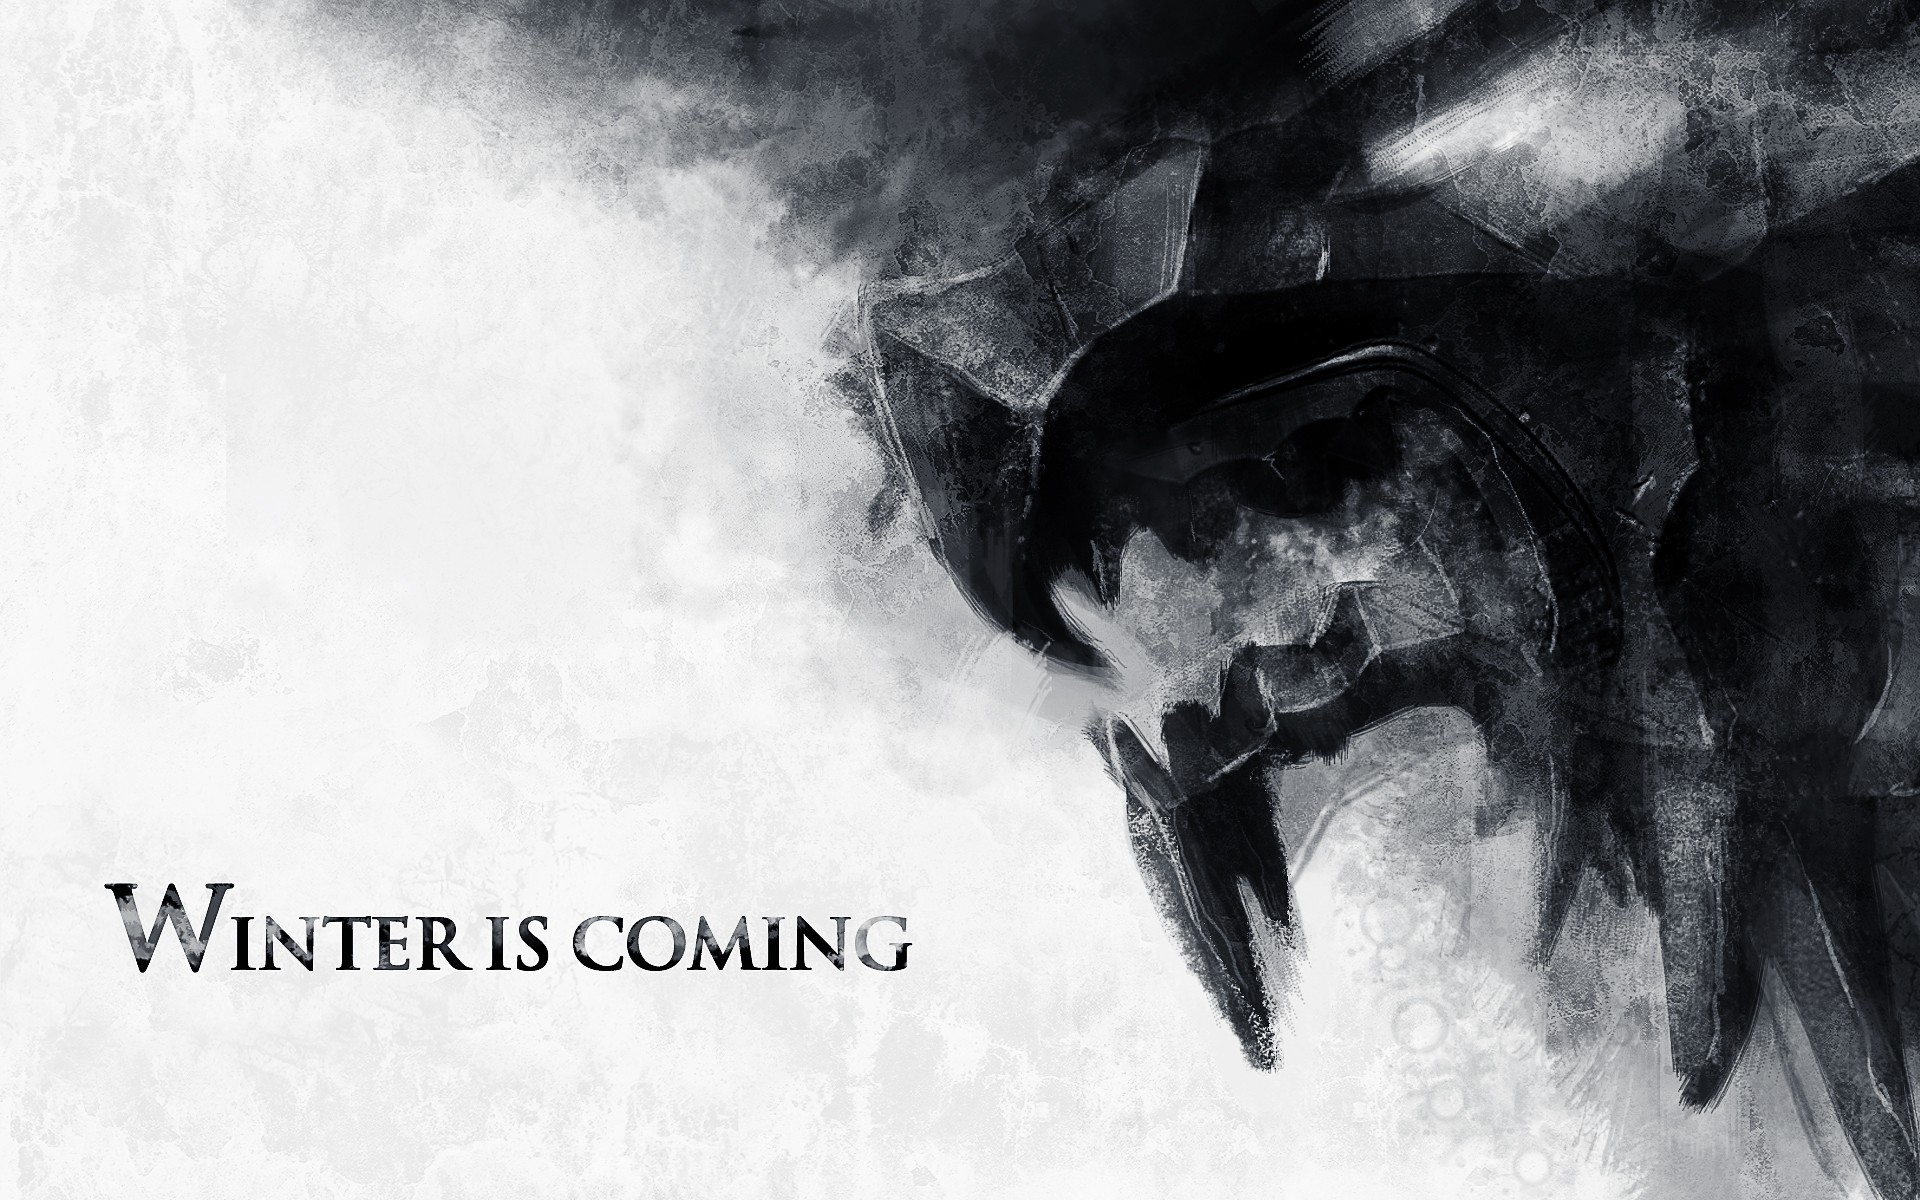 Game Of Thrones Direwolf Game Of Thrones Winter Is Coming Winter Is Coming Game Of Thrones Tv Series 1920x1200